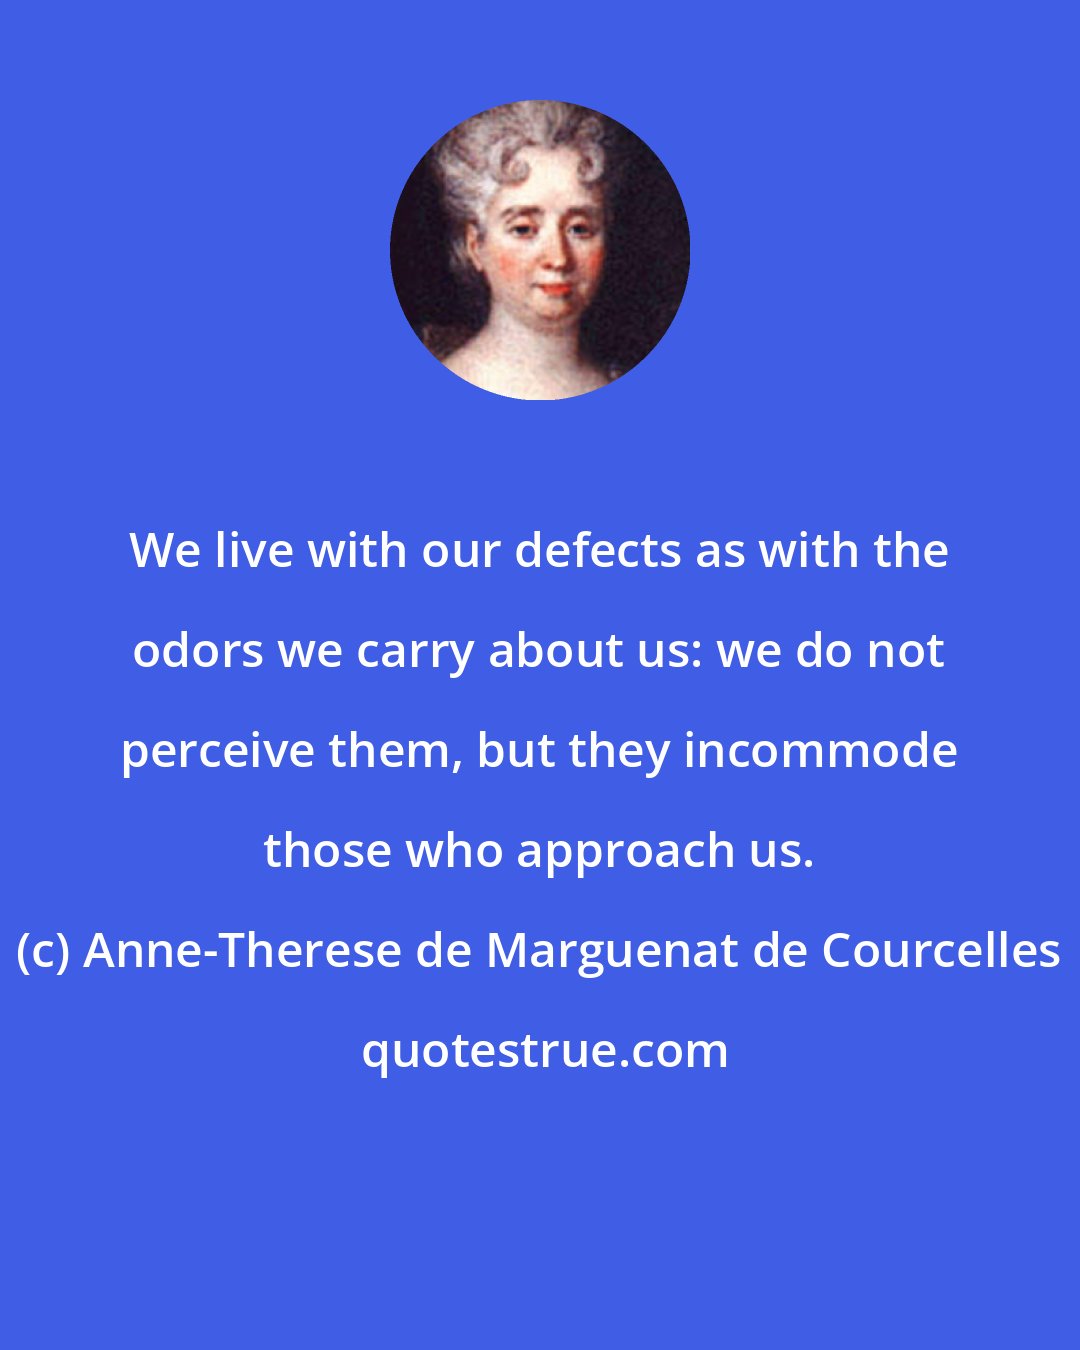 Anne-Therese de Marguenat de Courcelles: We live with our defects as with the odors we carry about us: we do not perceive them, but they incommode those who approach us.